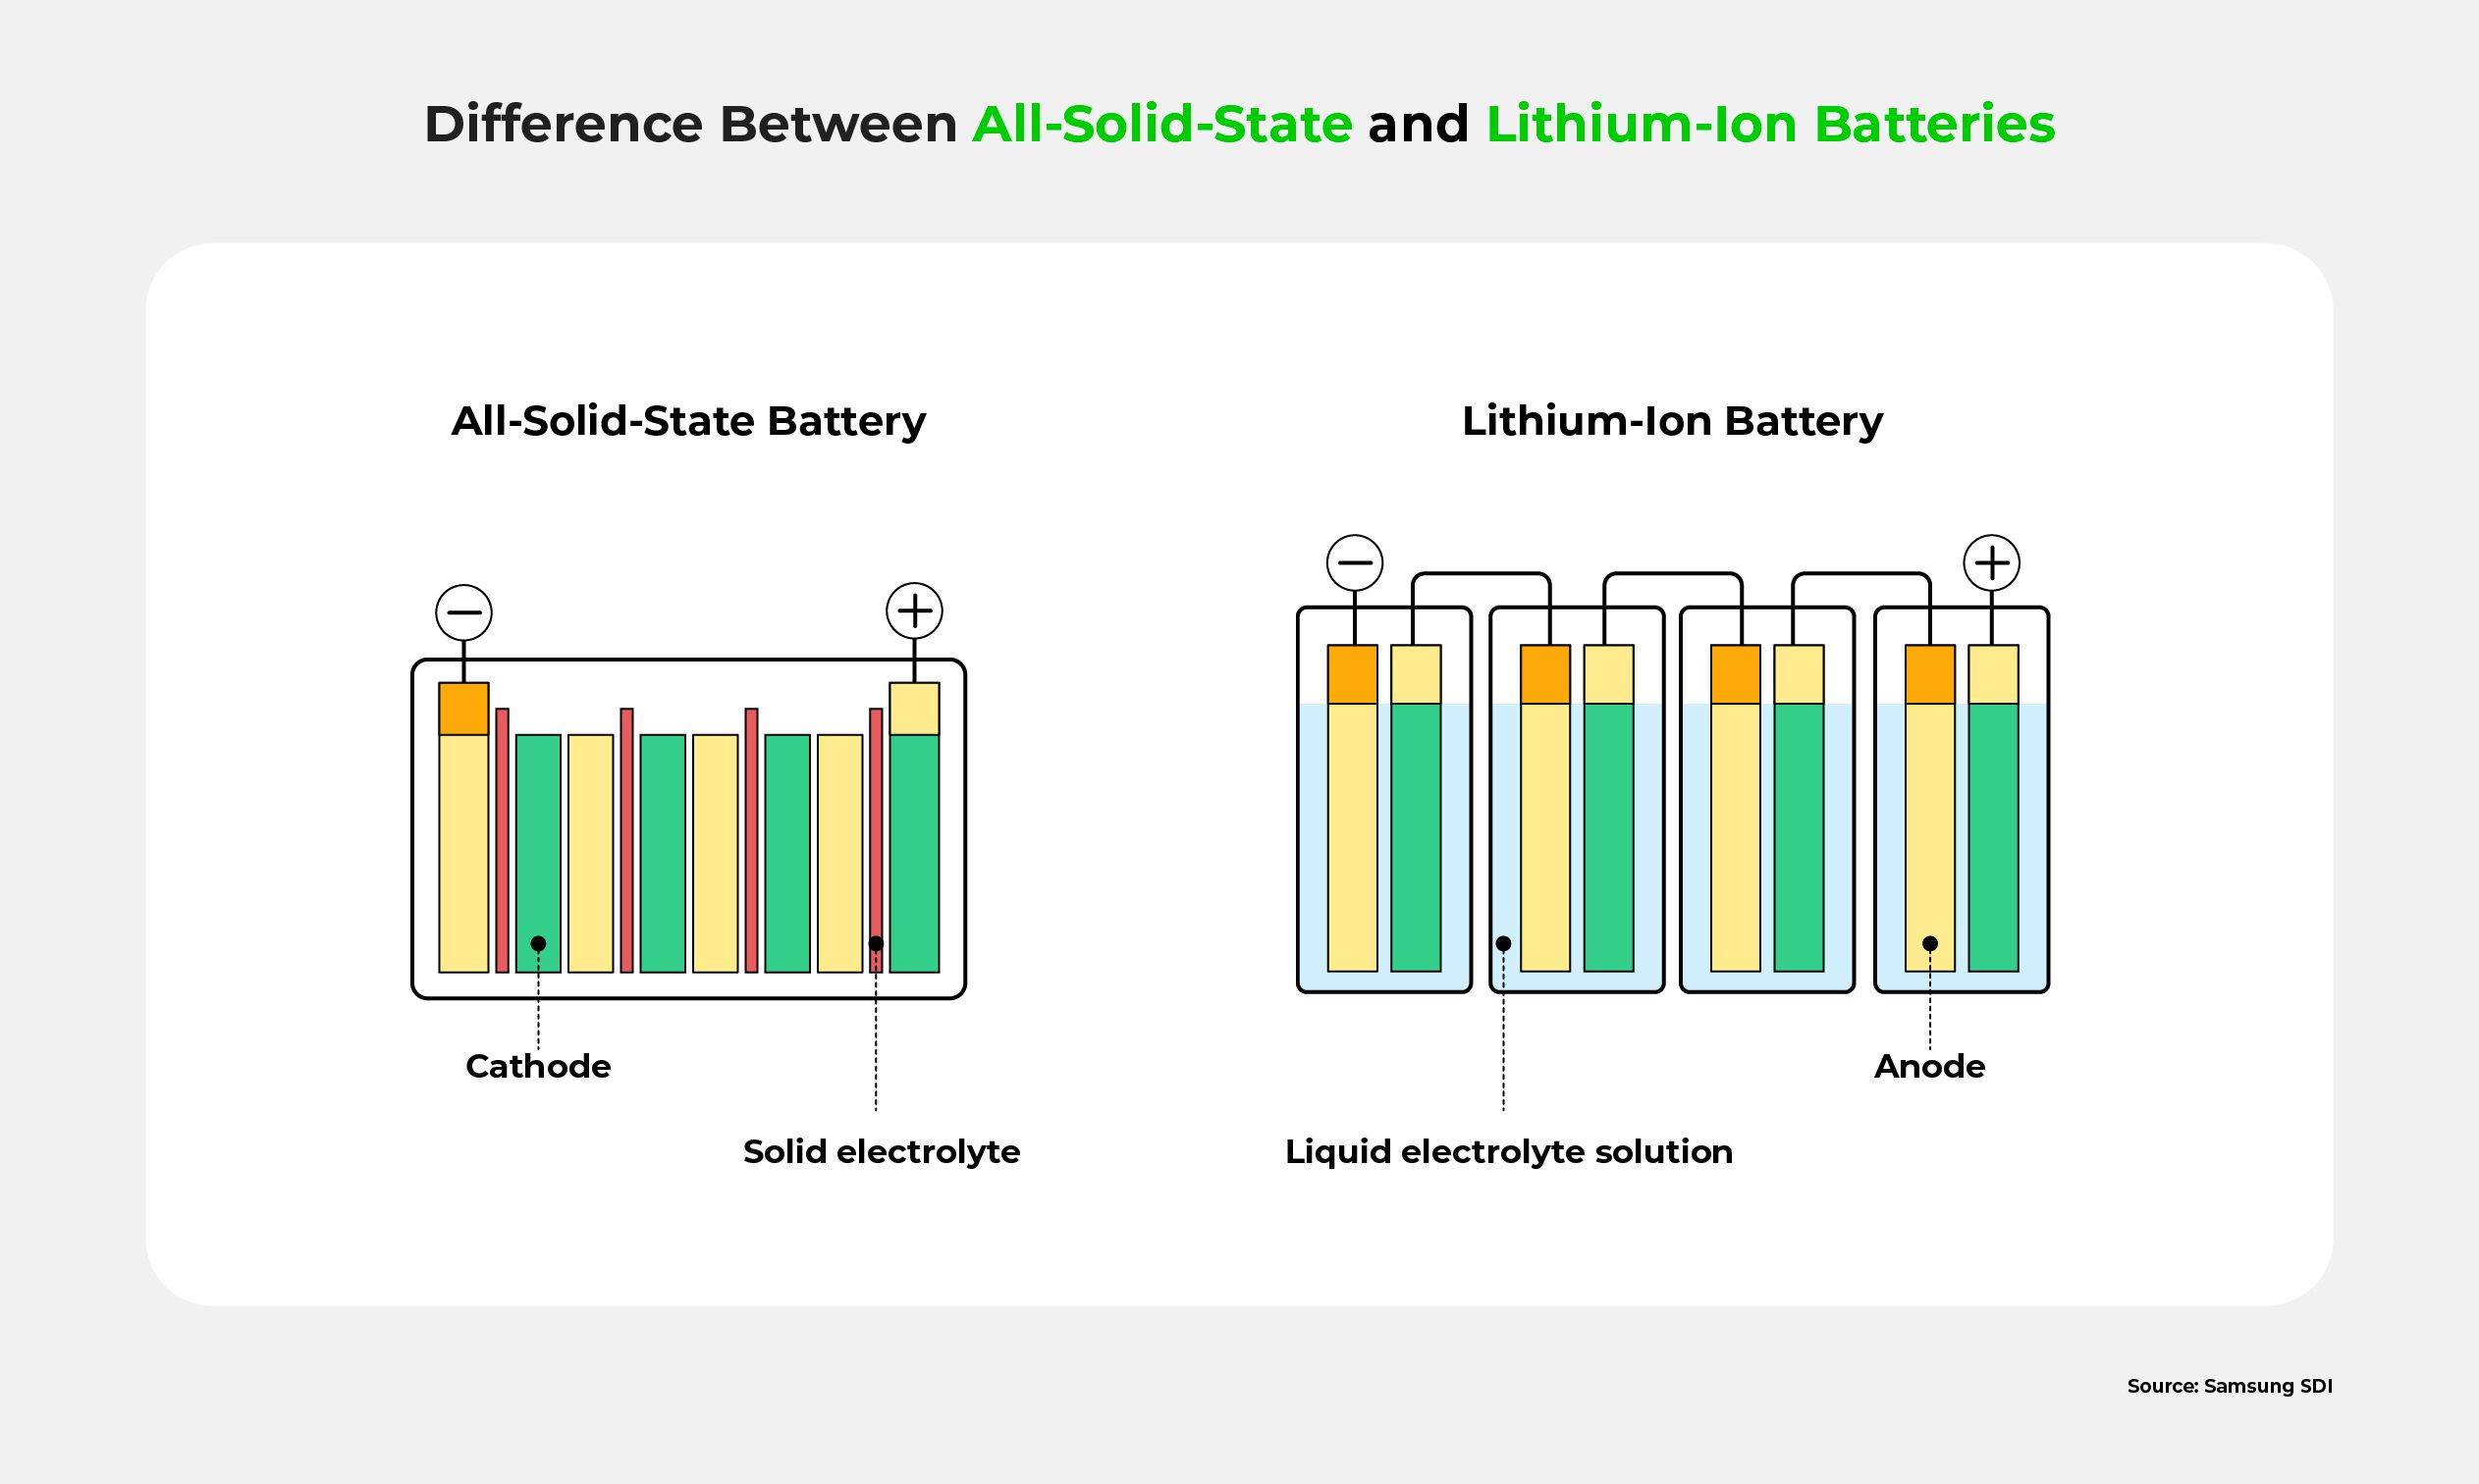 A diagram showing the difference between all-solid-state and lithium-ion batteries